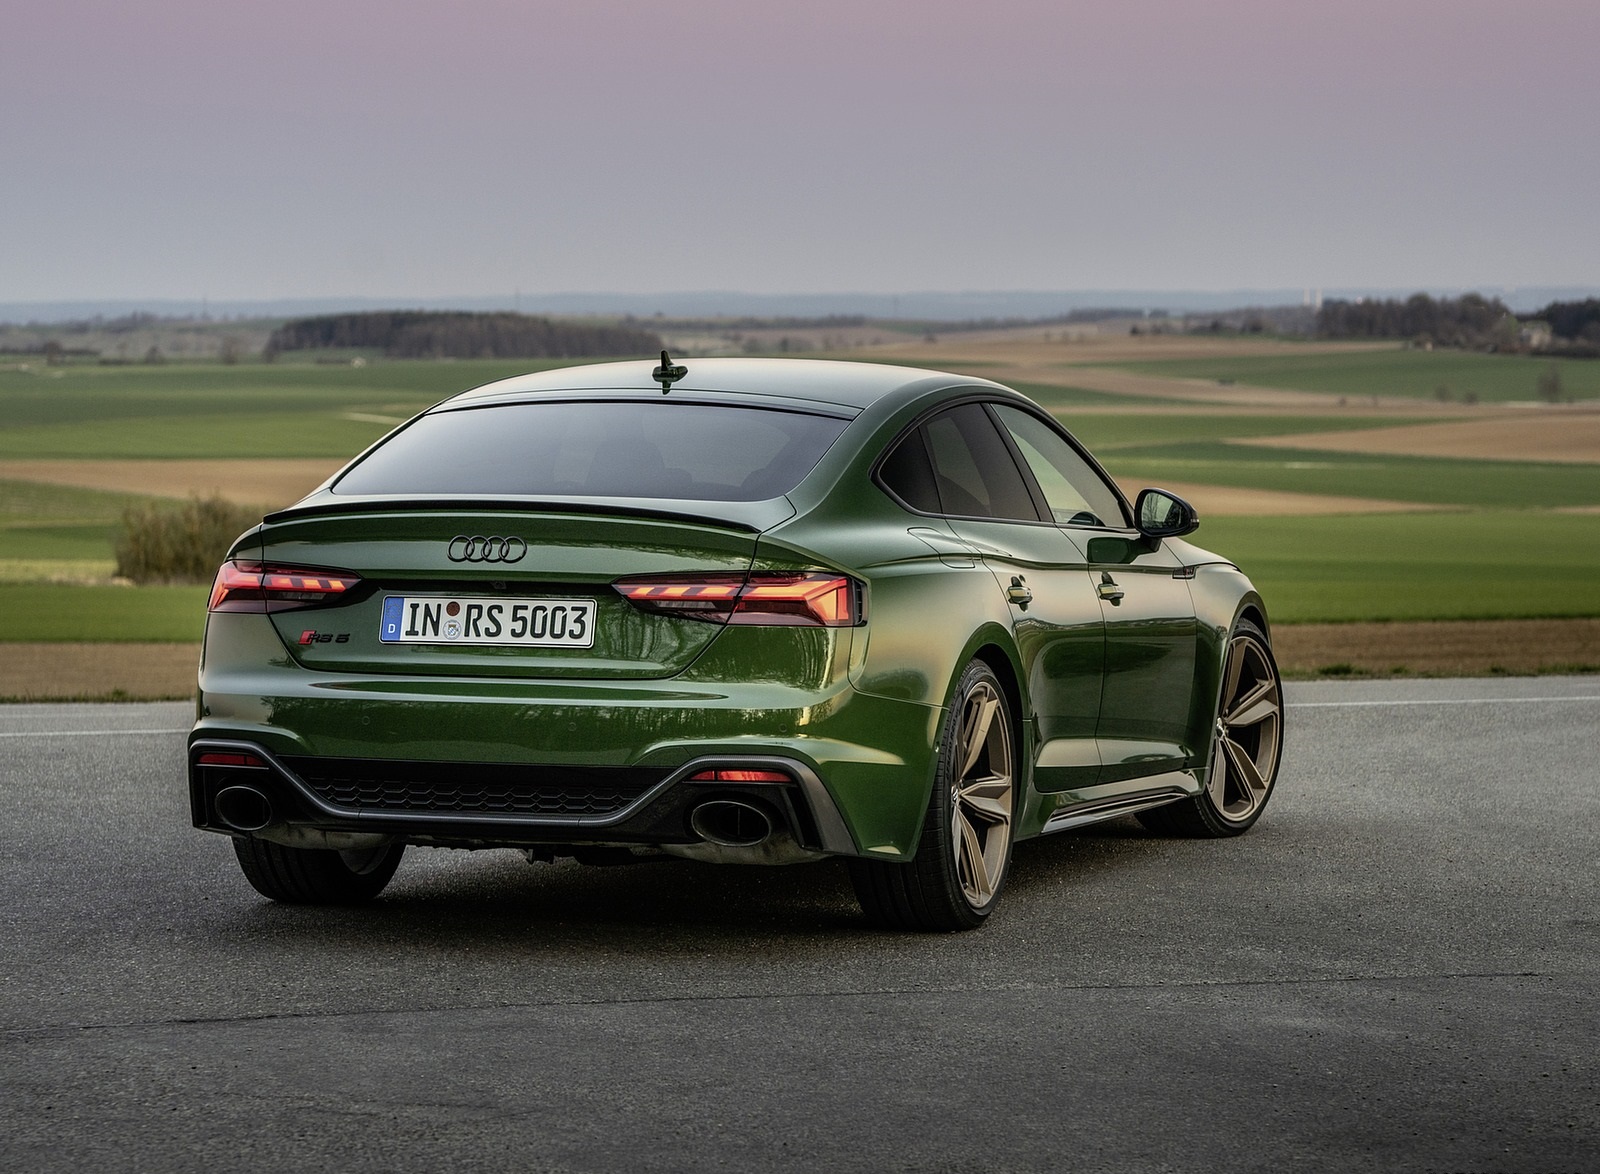 2020 Audi RS 5 Sportback (Color: Sonoma Green) Rear Three-Quarter Wallpapers #14 of 76